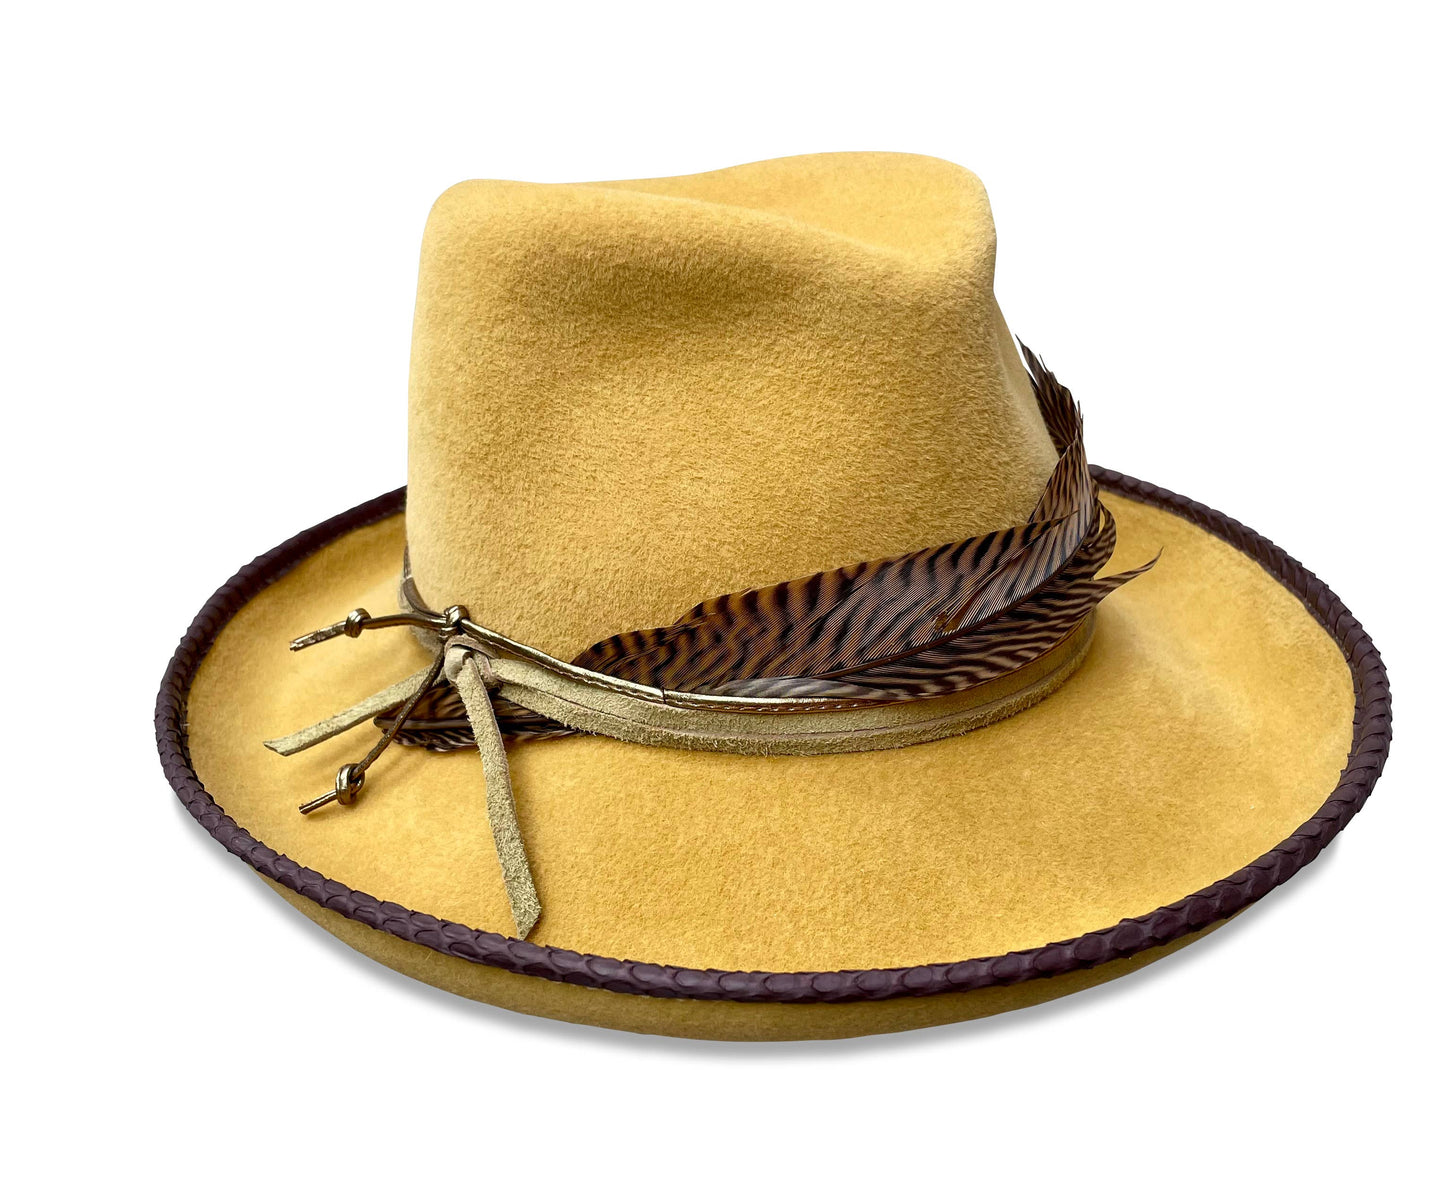 Cha Cha's House of Ill Repute - Seer Woman Mustard Brown Trim Brim Feather